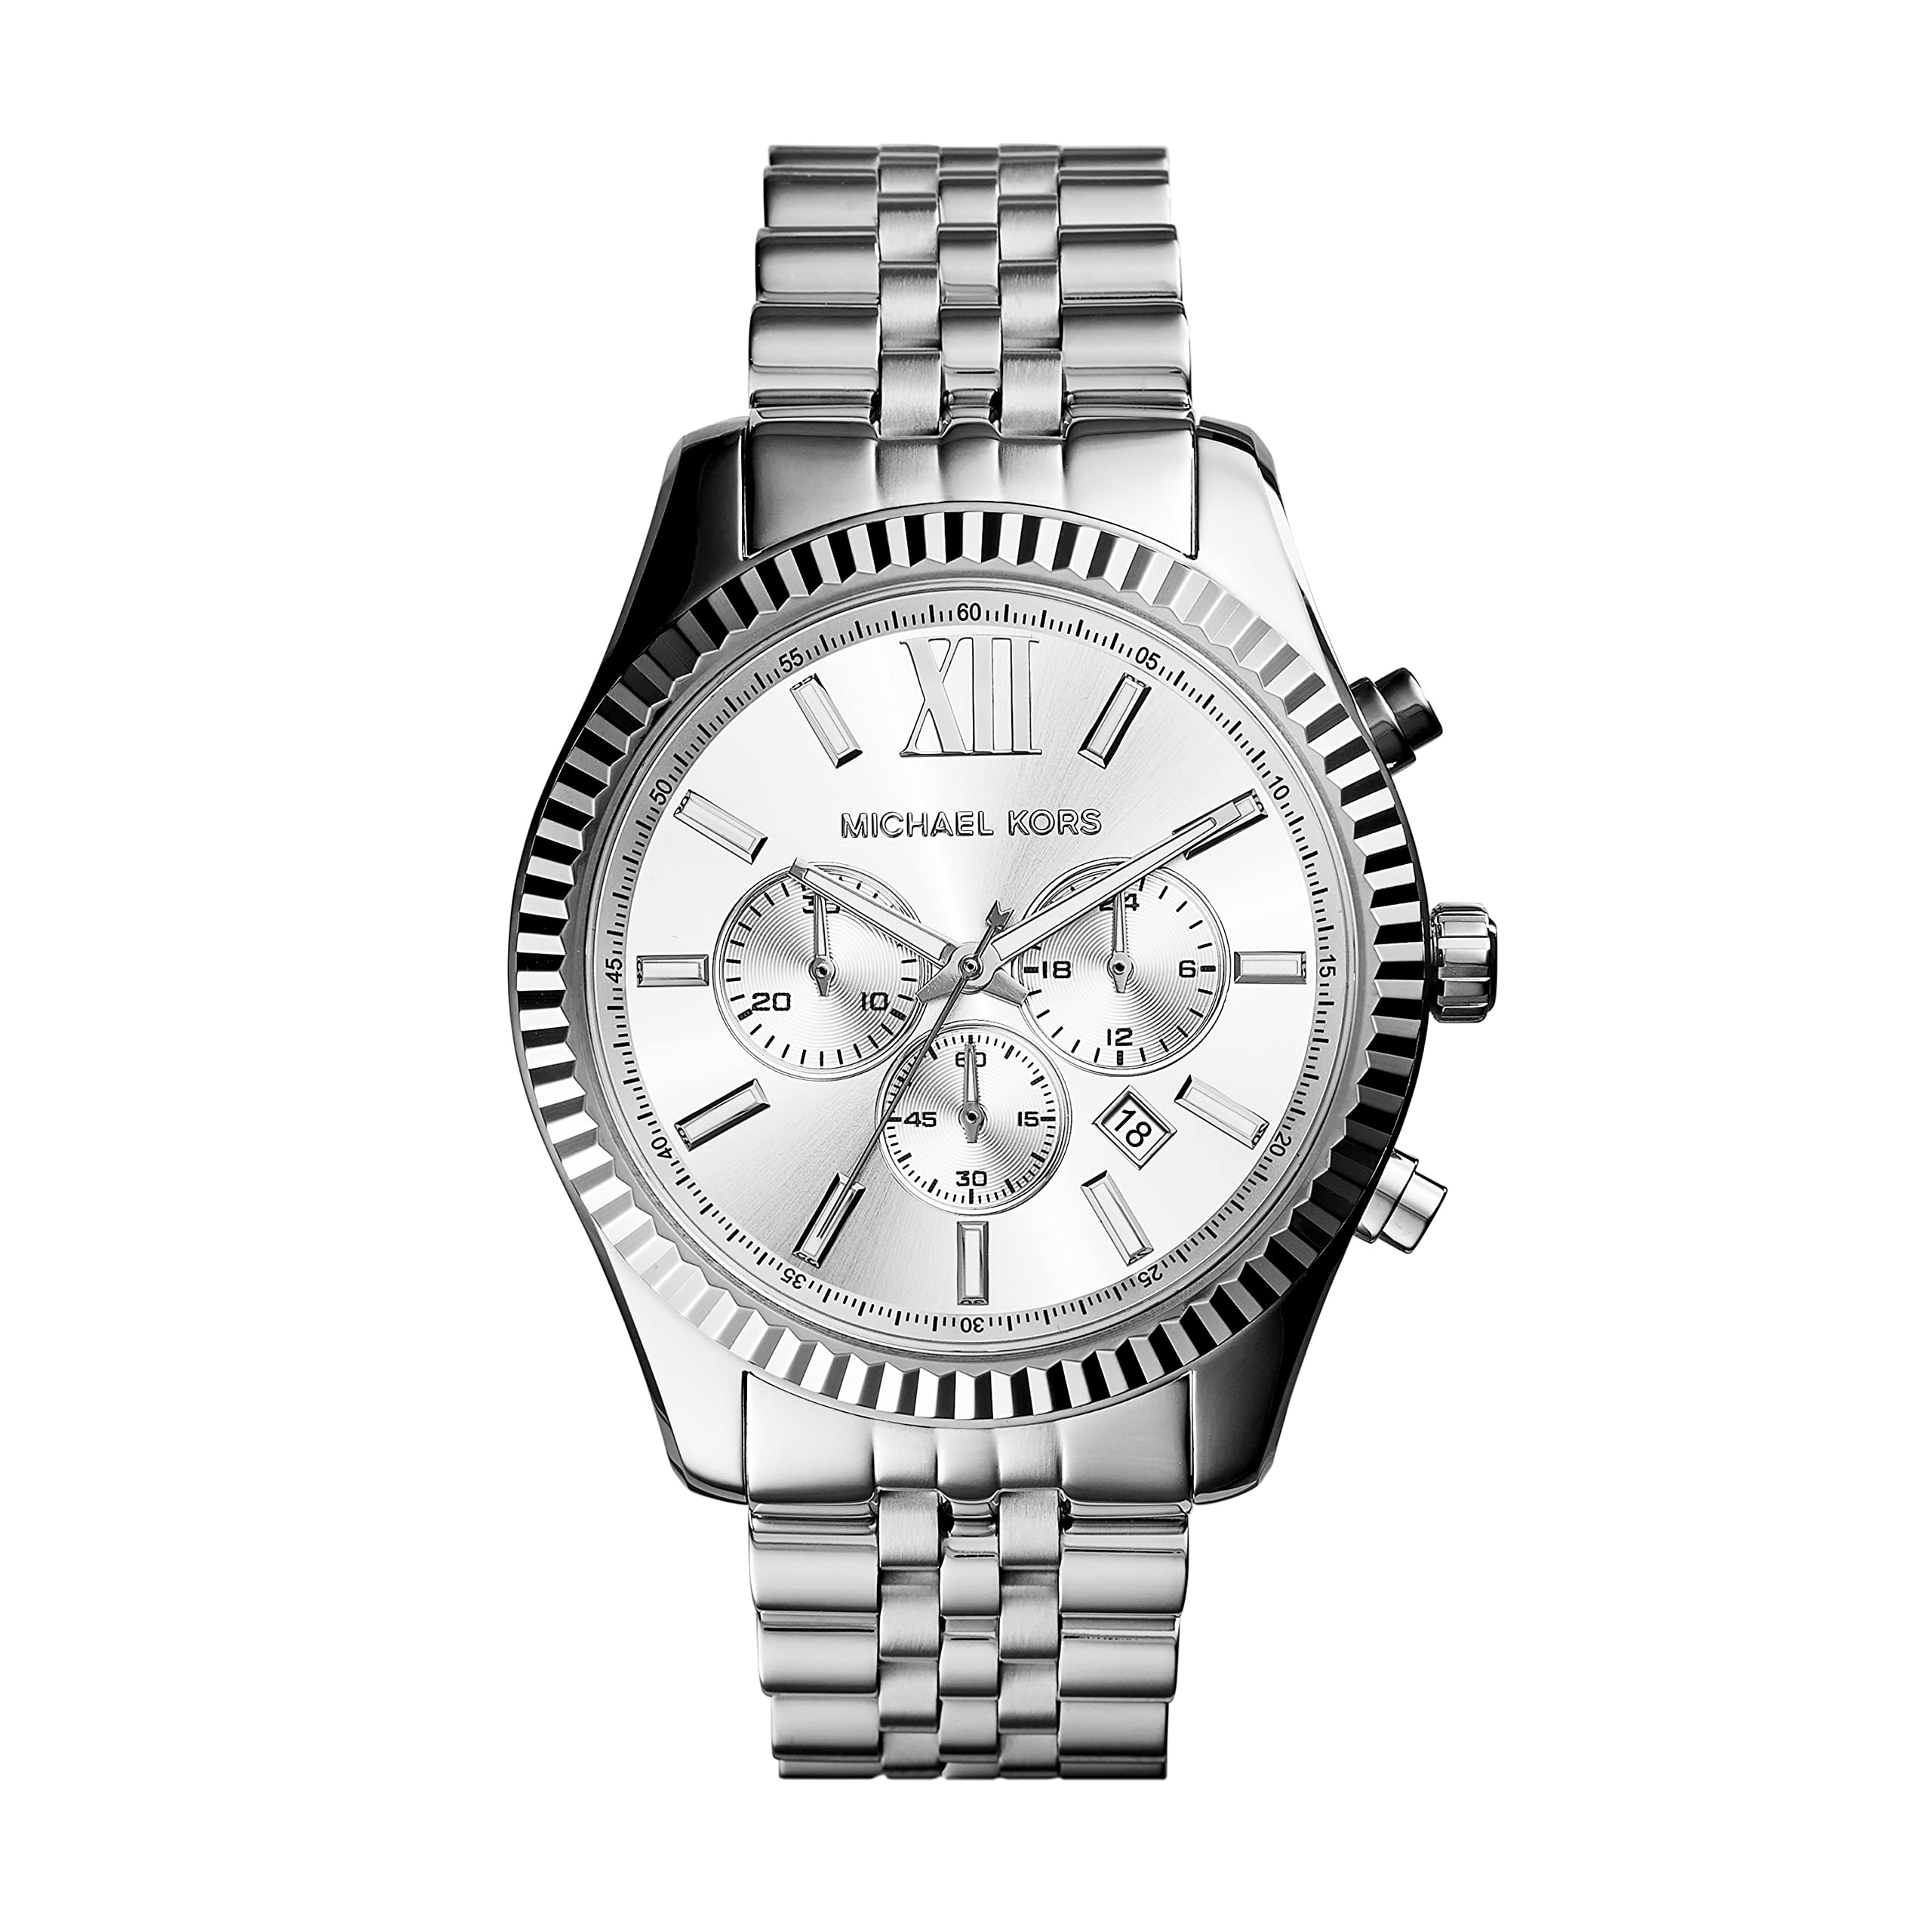 Amazoncom Michael Kors Mens Cortlandt Stainless Steel AnalogQuartz  Watch with StainlessSteel Strap Silver 208 Model MK8641  Michael  Kors Clothing Shoes  Jewelry